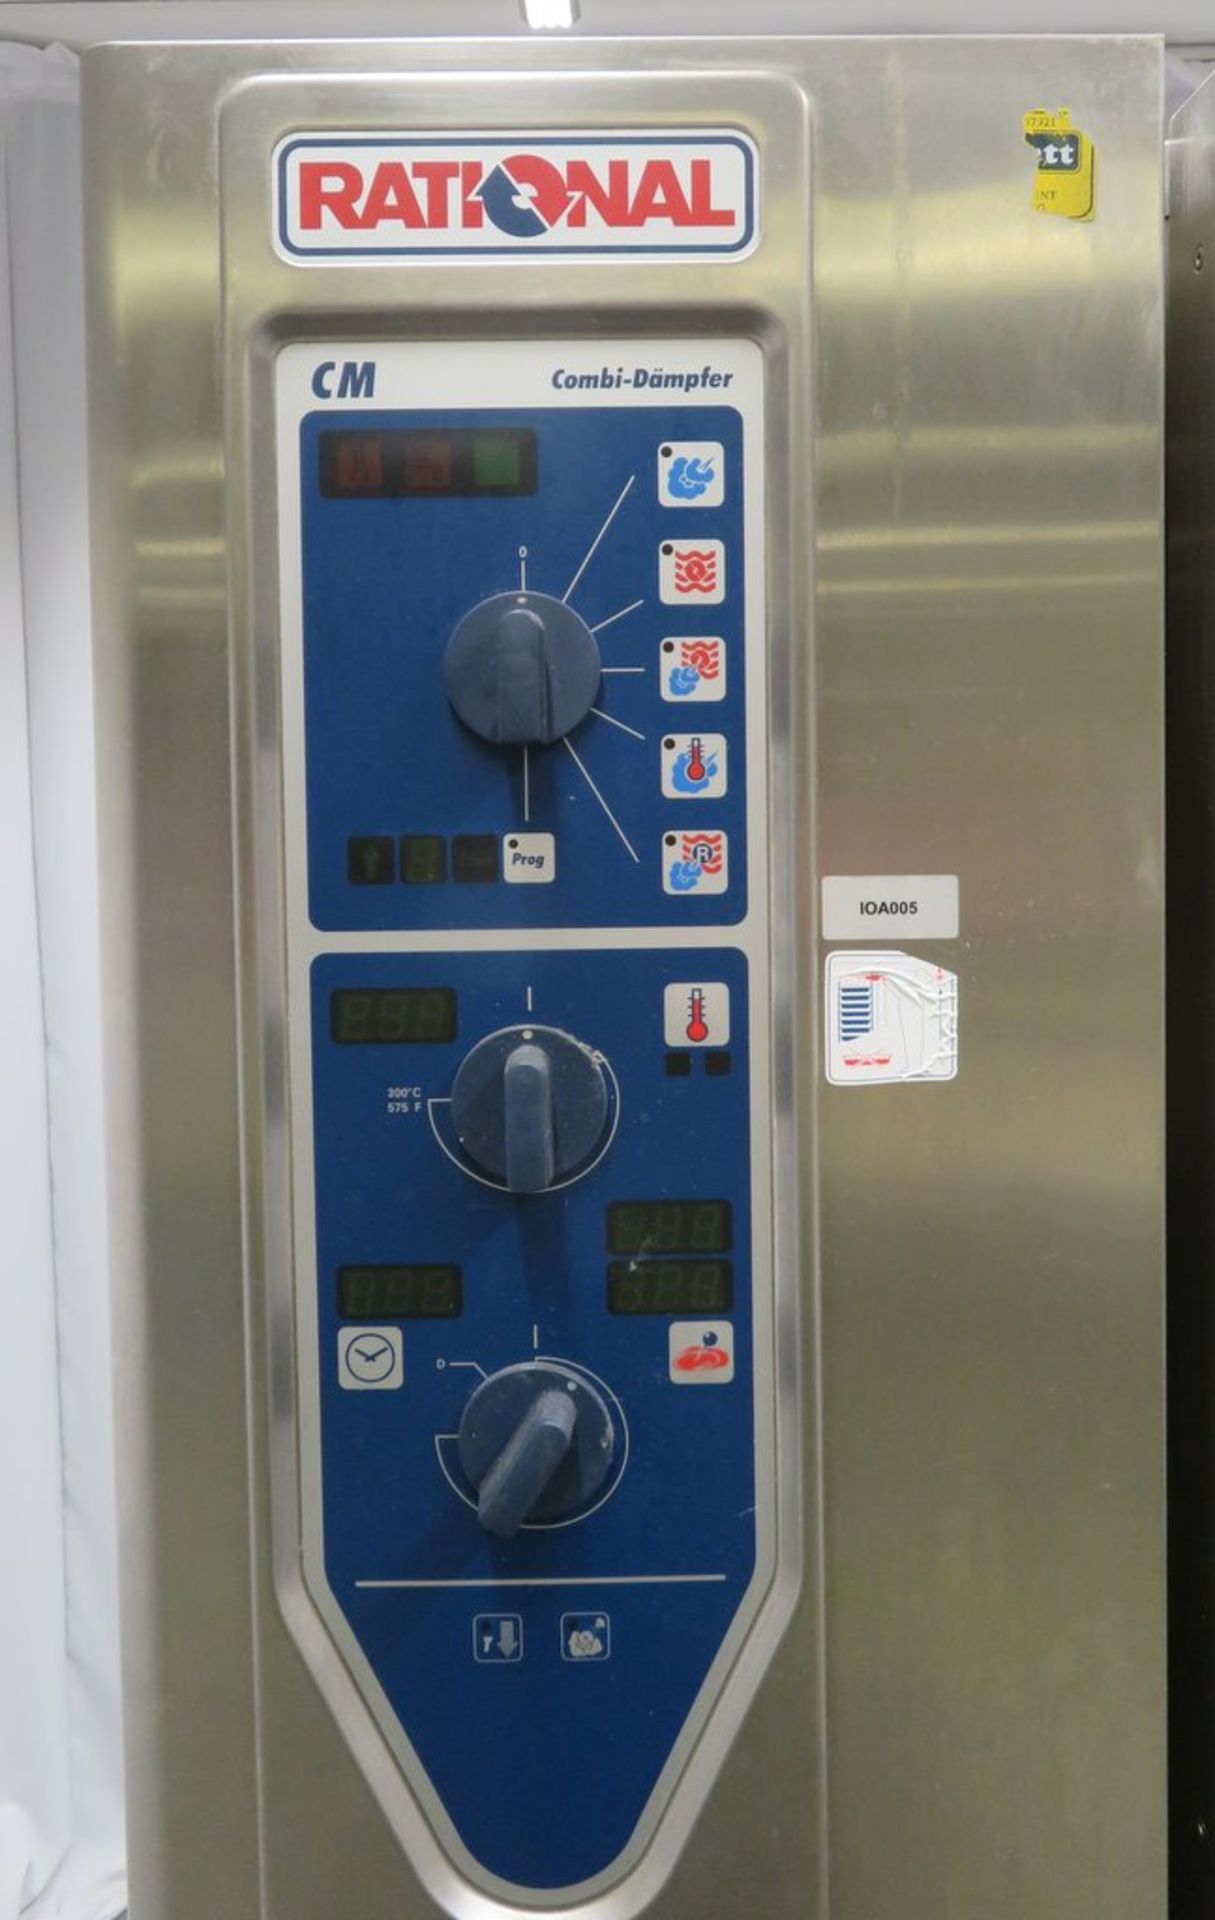 Rational CM 201 Combi-Dampfer 20 grid combi oven, 3 phase electric - Image 4 of 12